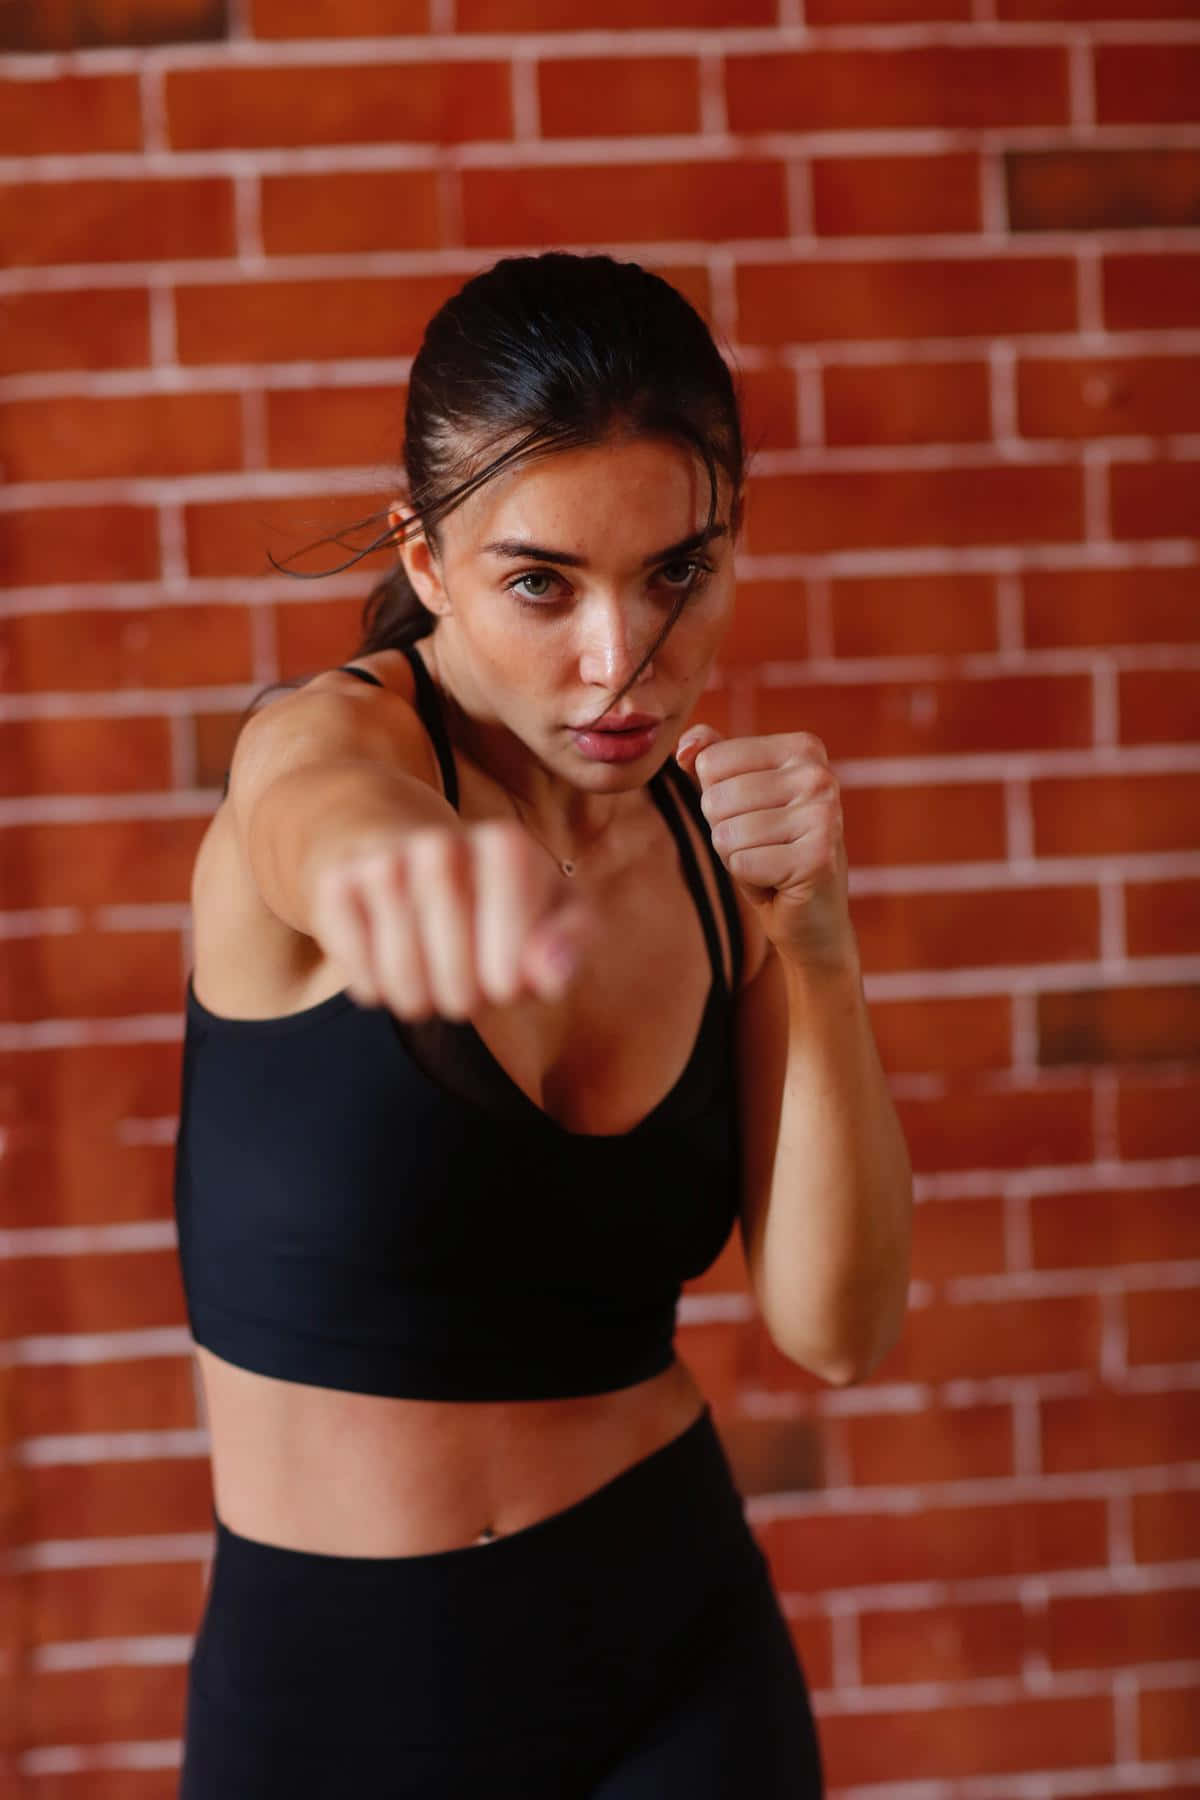 Fitness Enthusiast Boxing Pose Wallpaper